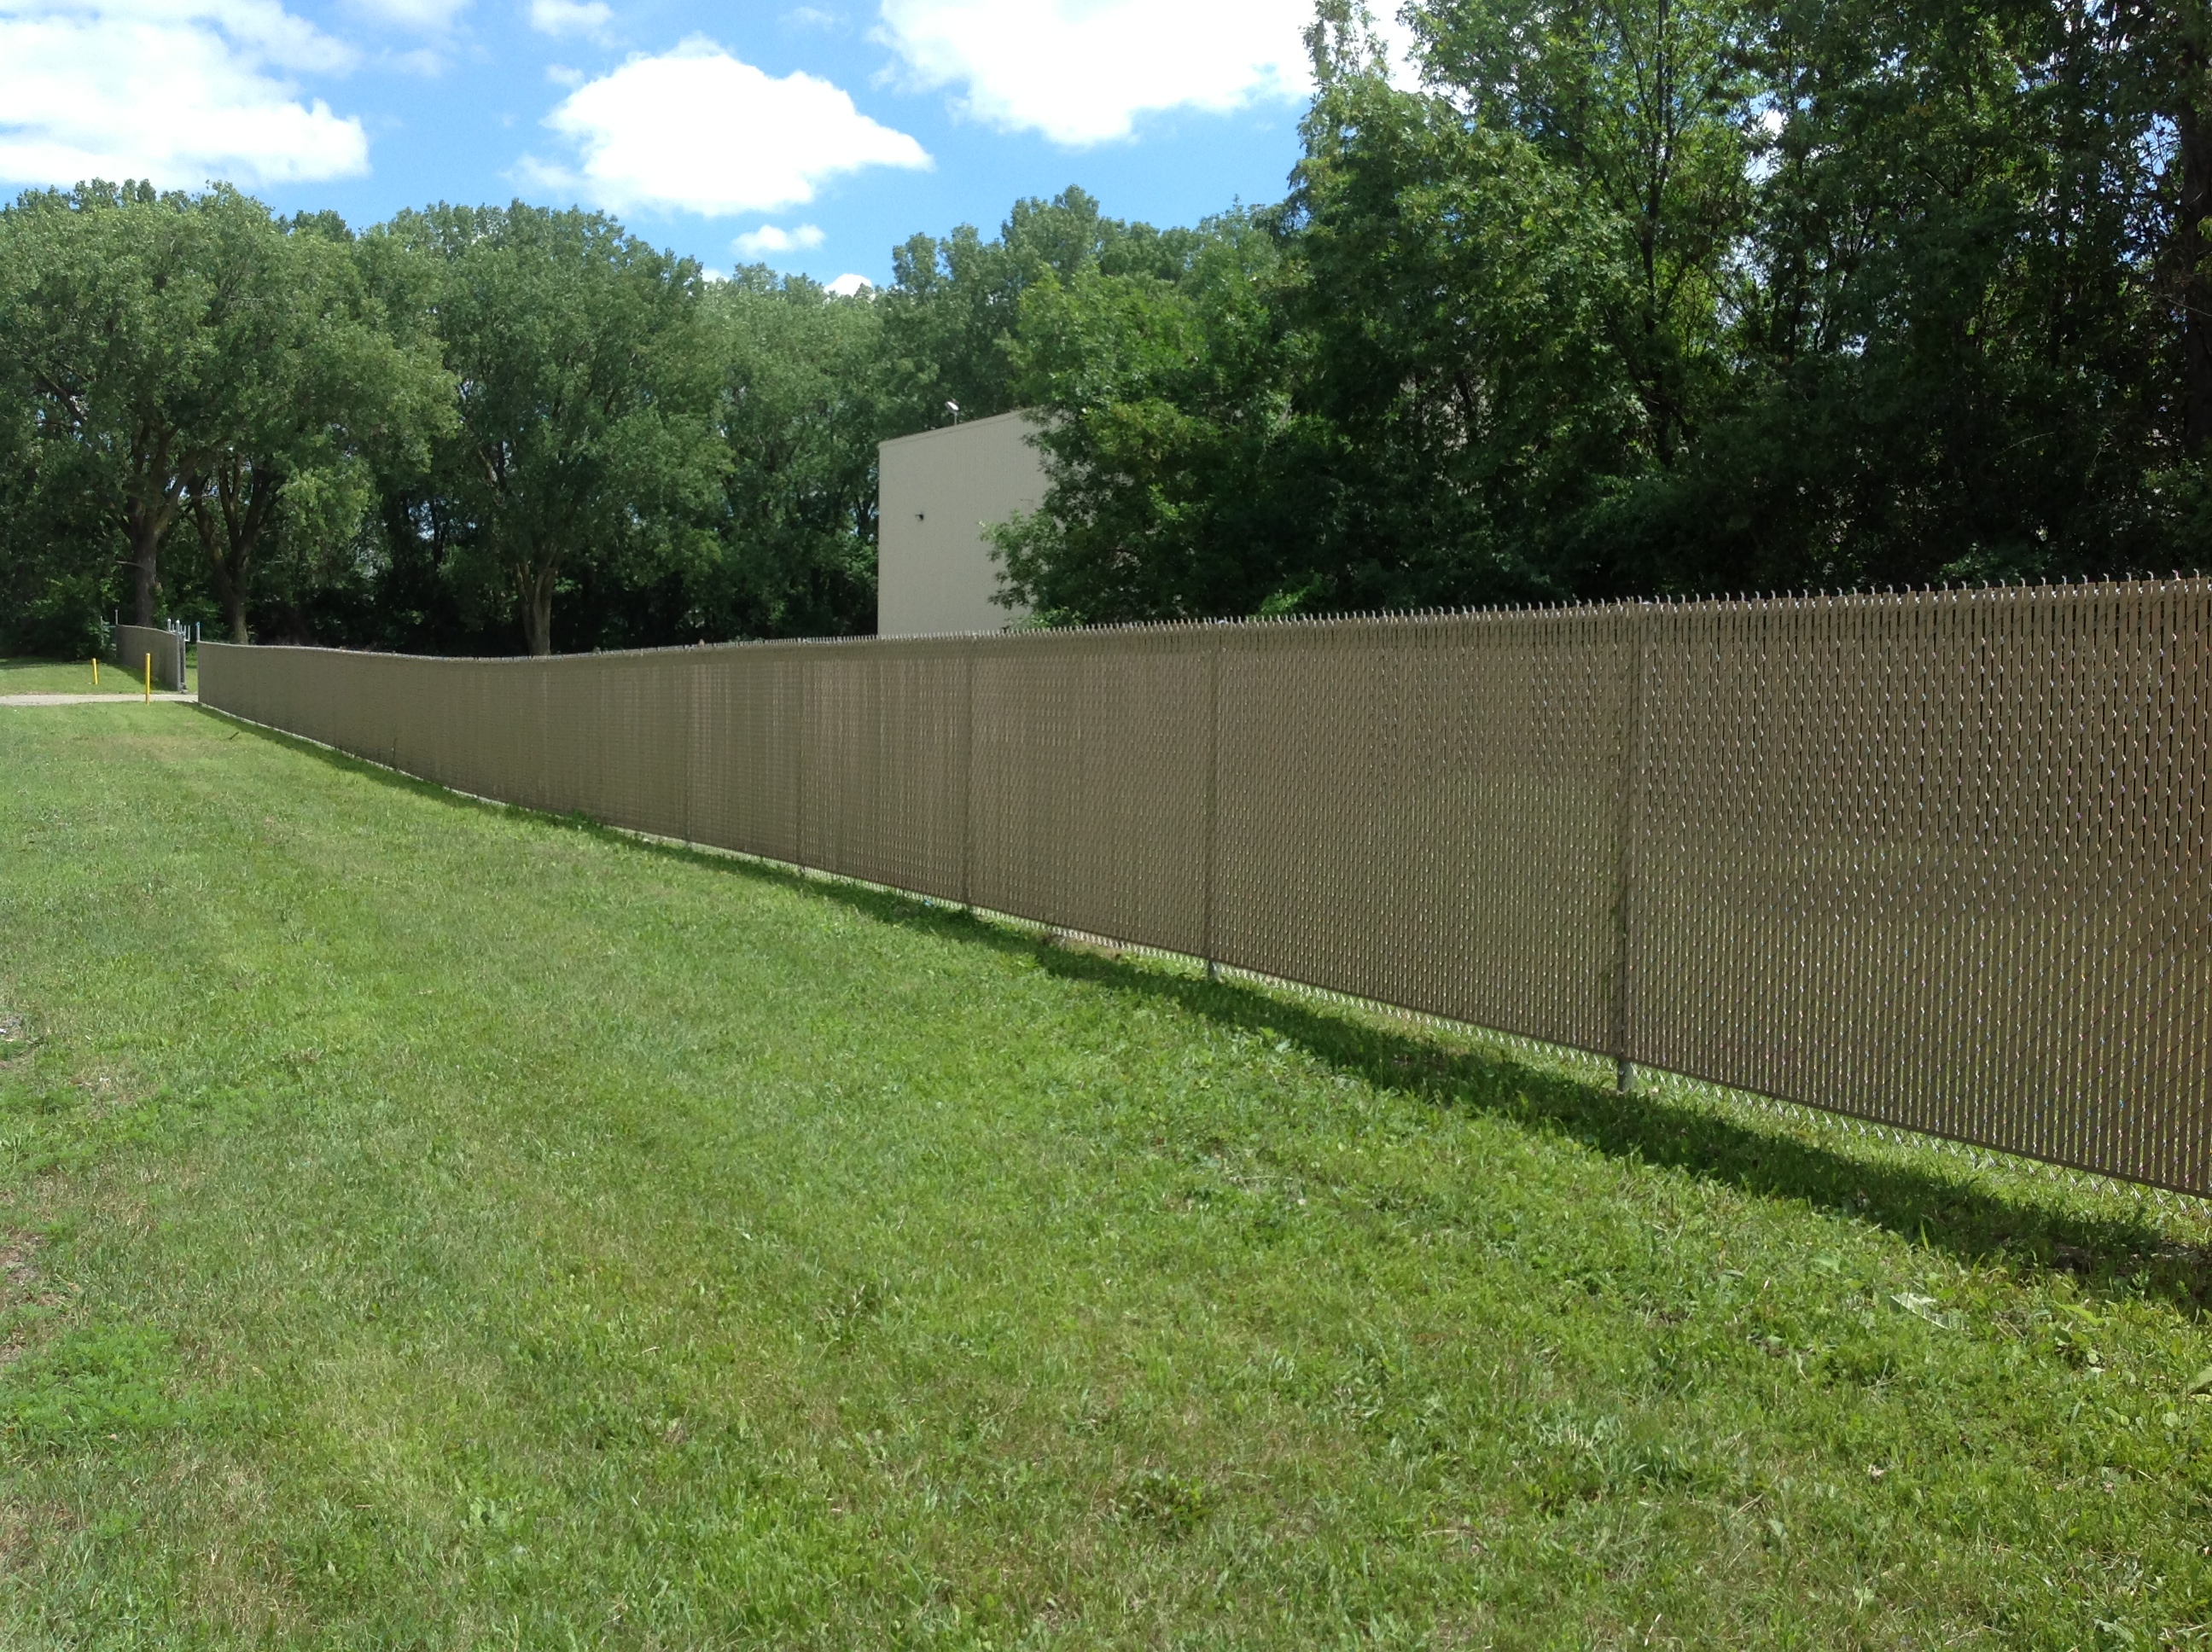 Chain Link Fence Screening Slats Fences Design pertaining to size 2592 X 1936